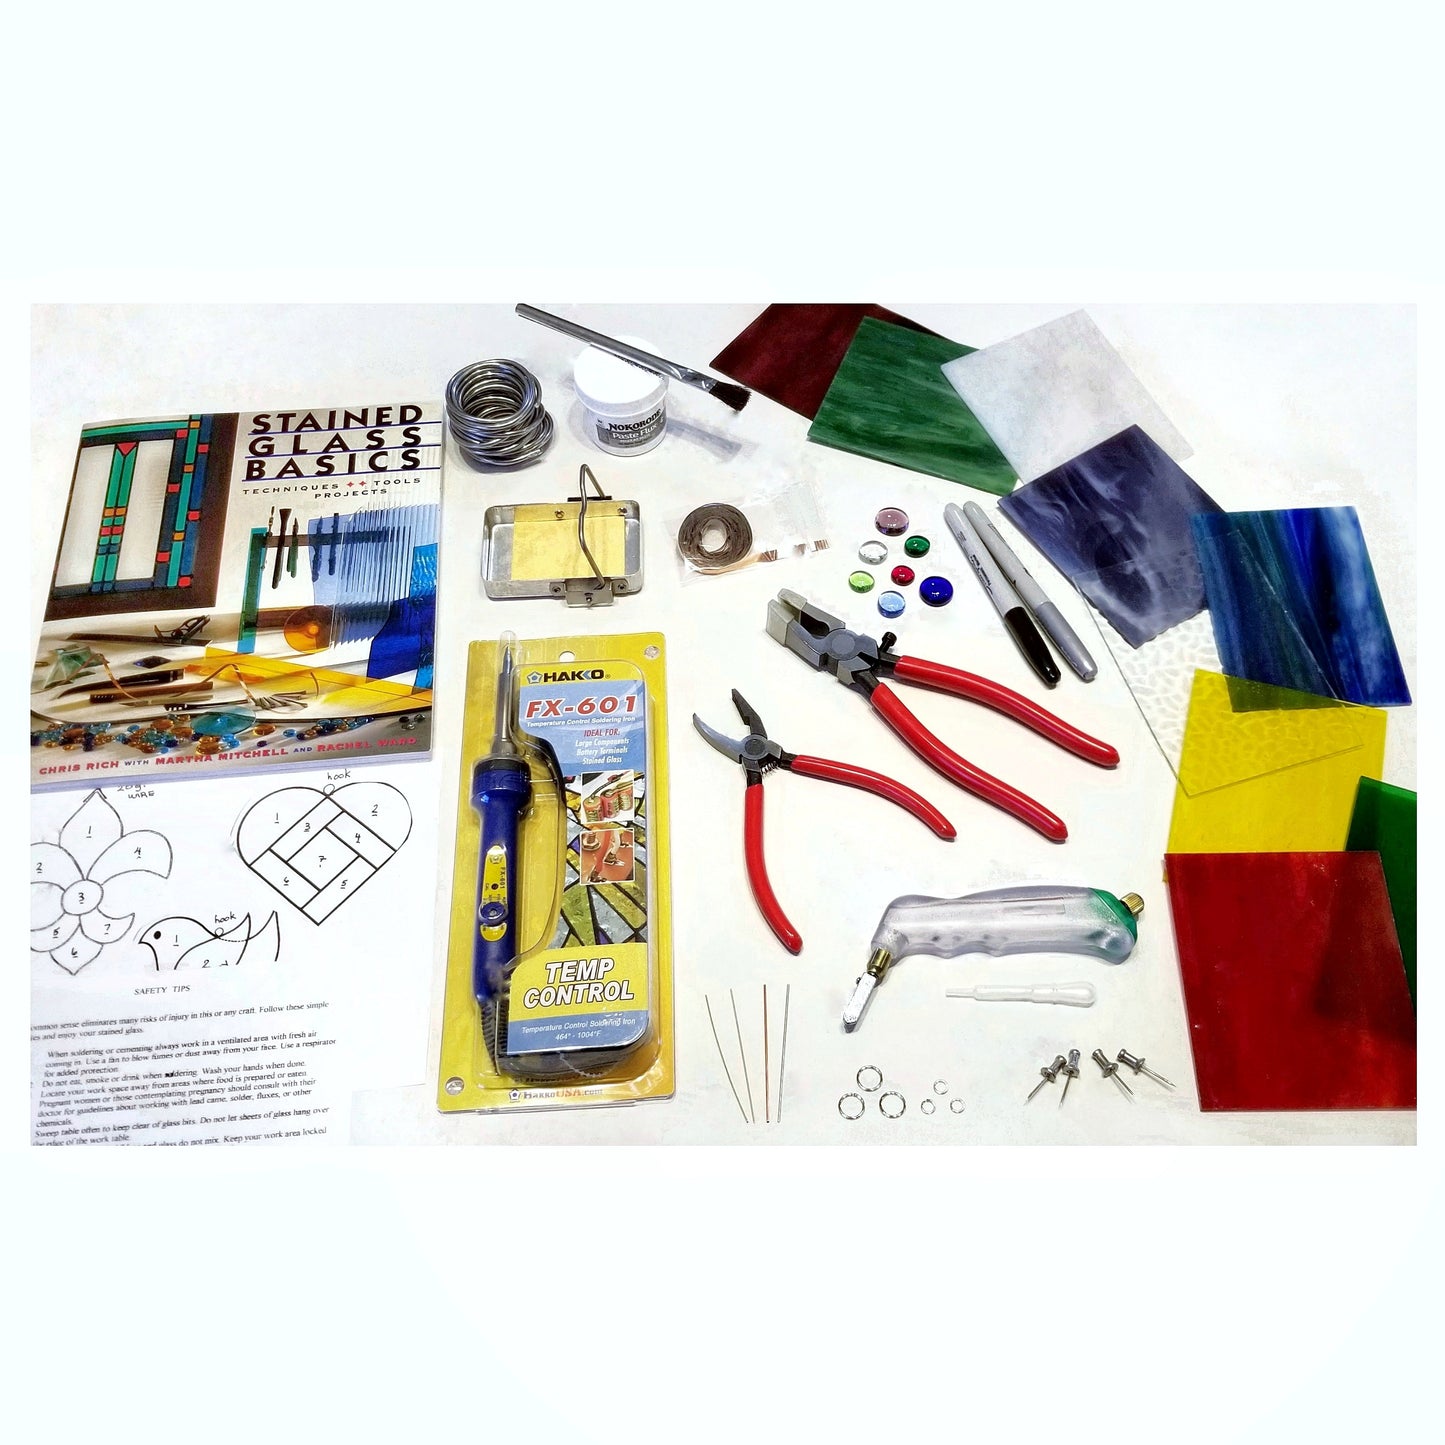 Stained Glass Beginner Tool Kit with Hakko Soldering Iron, Palm Grip Cutter, Colorful Glass Sheets, Instruction Book, Supplies. 1-3 day ship